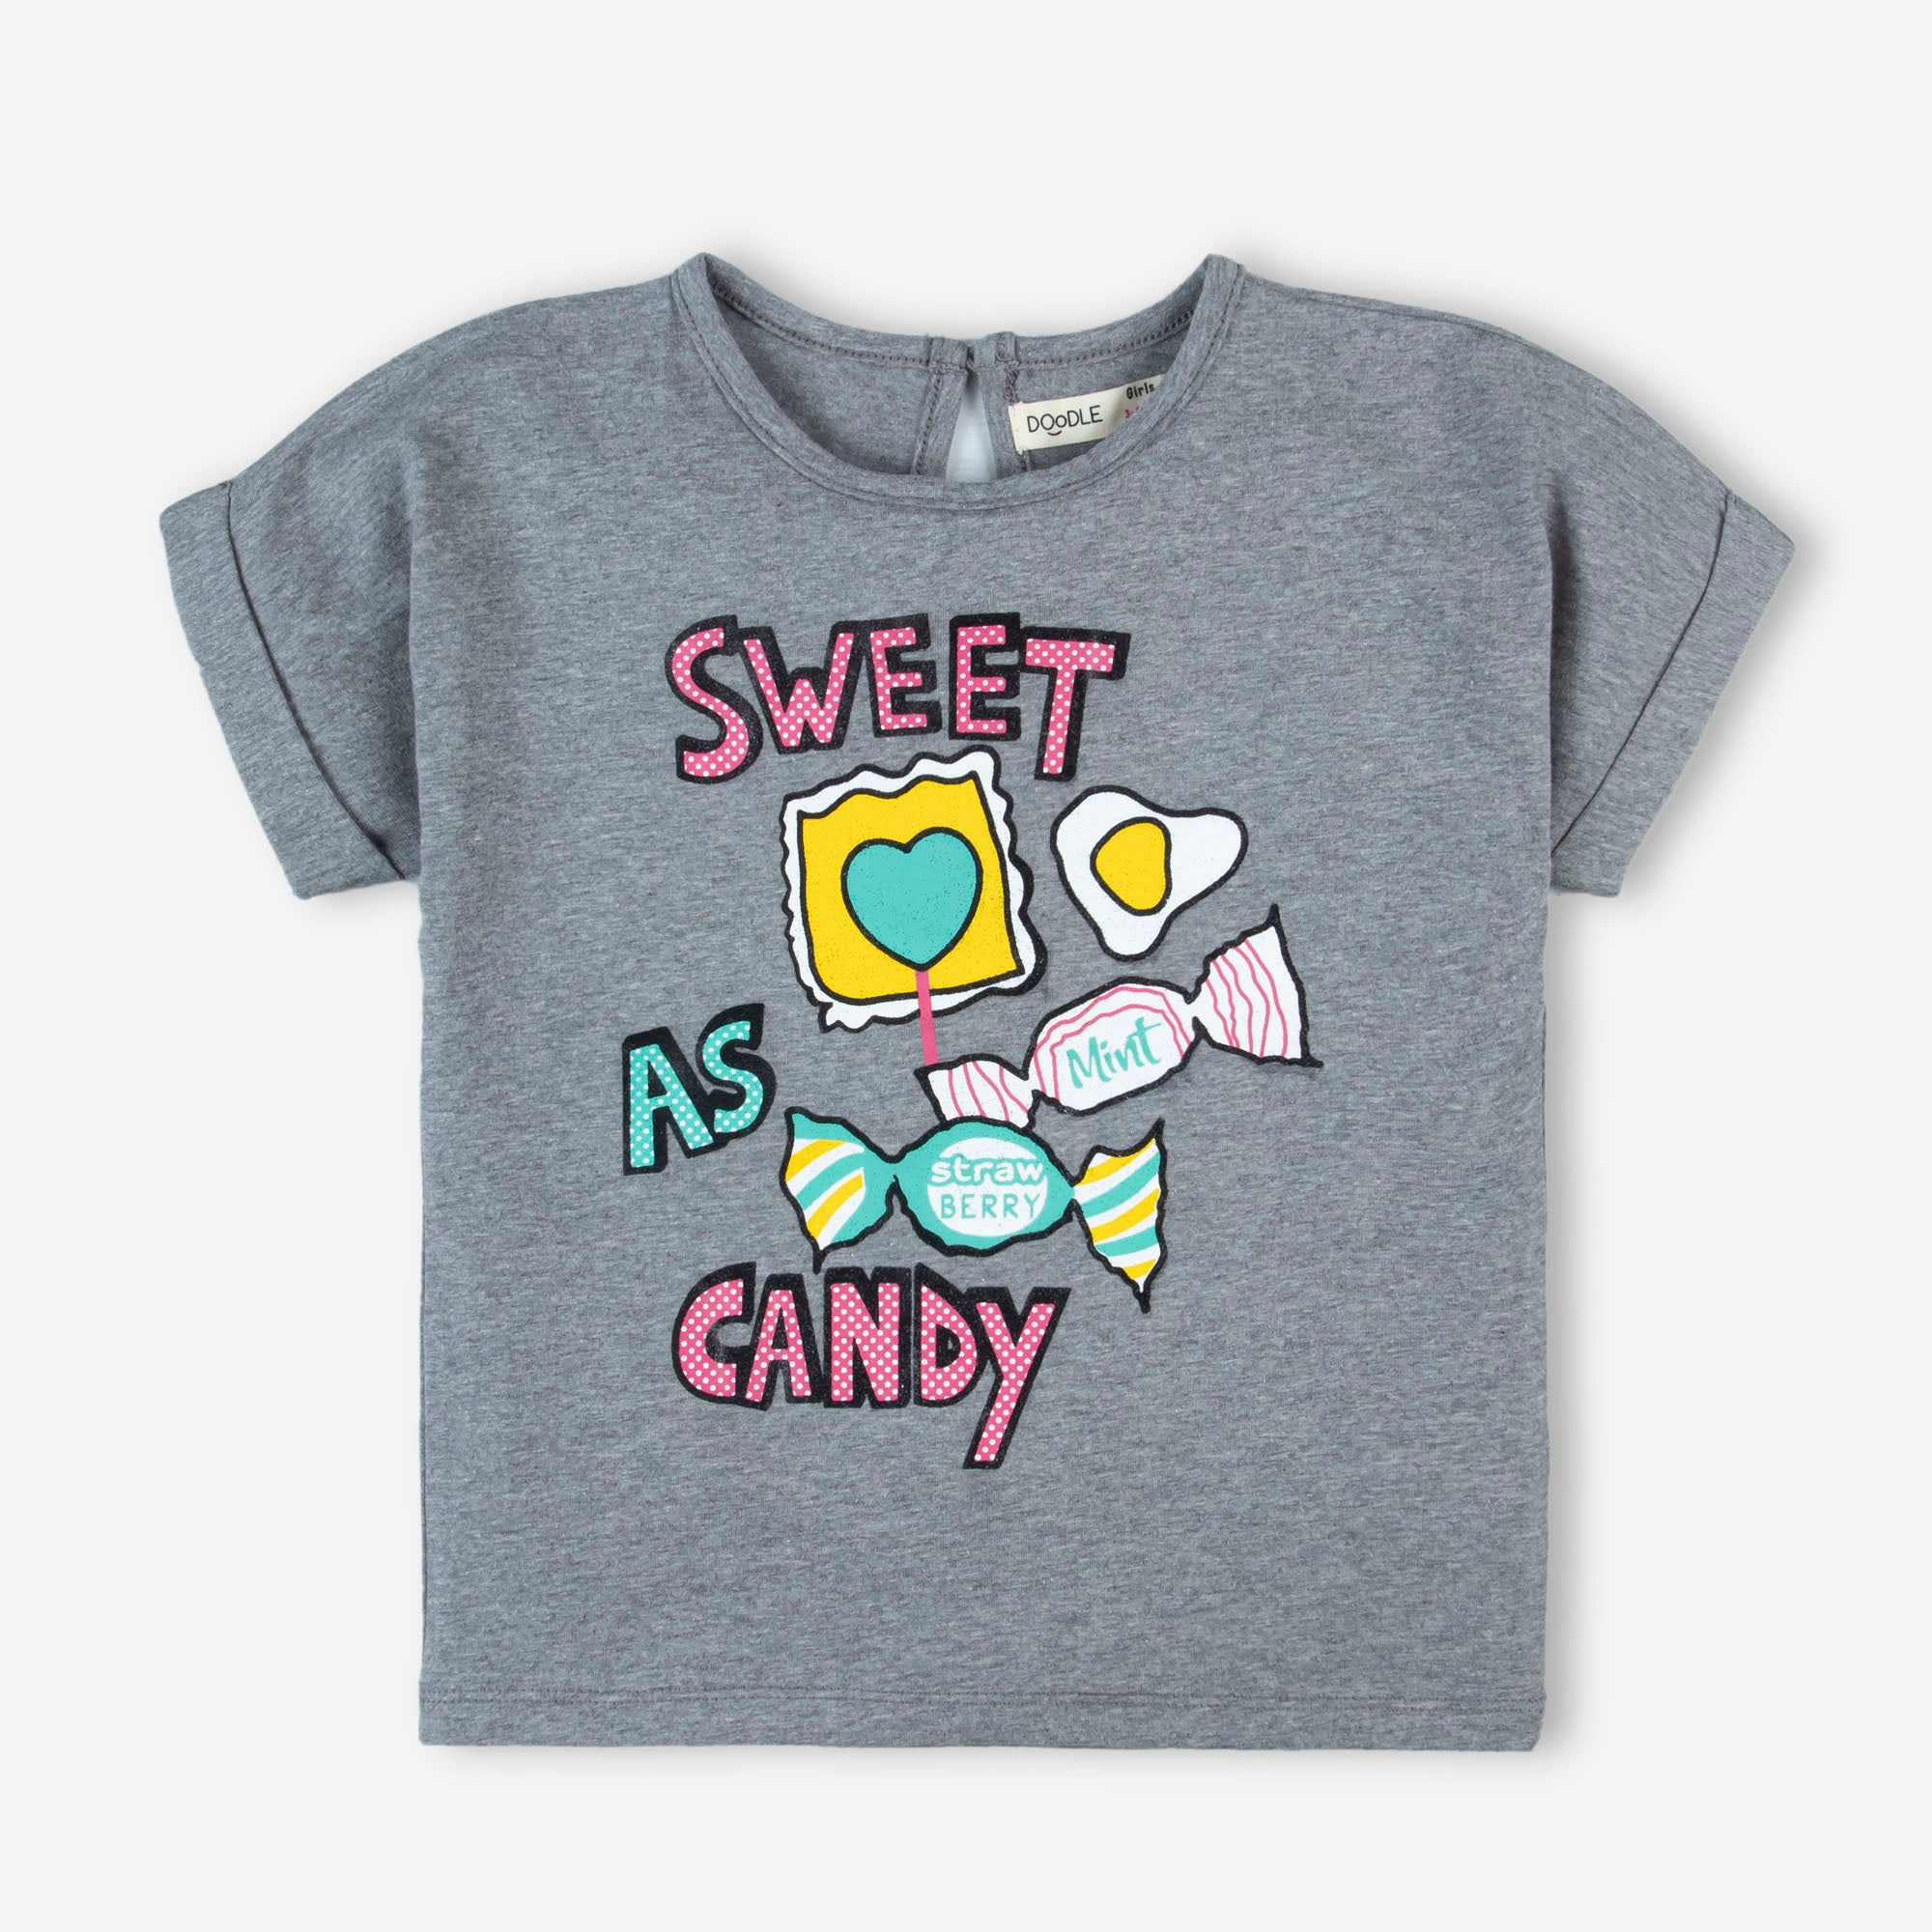 Sweet Candy Top